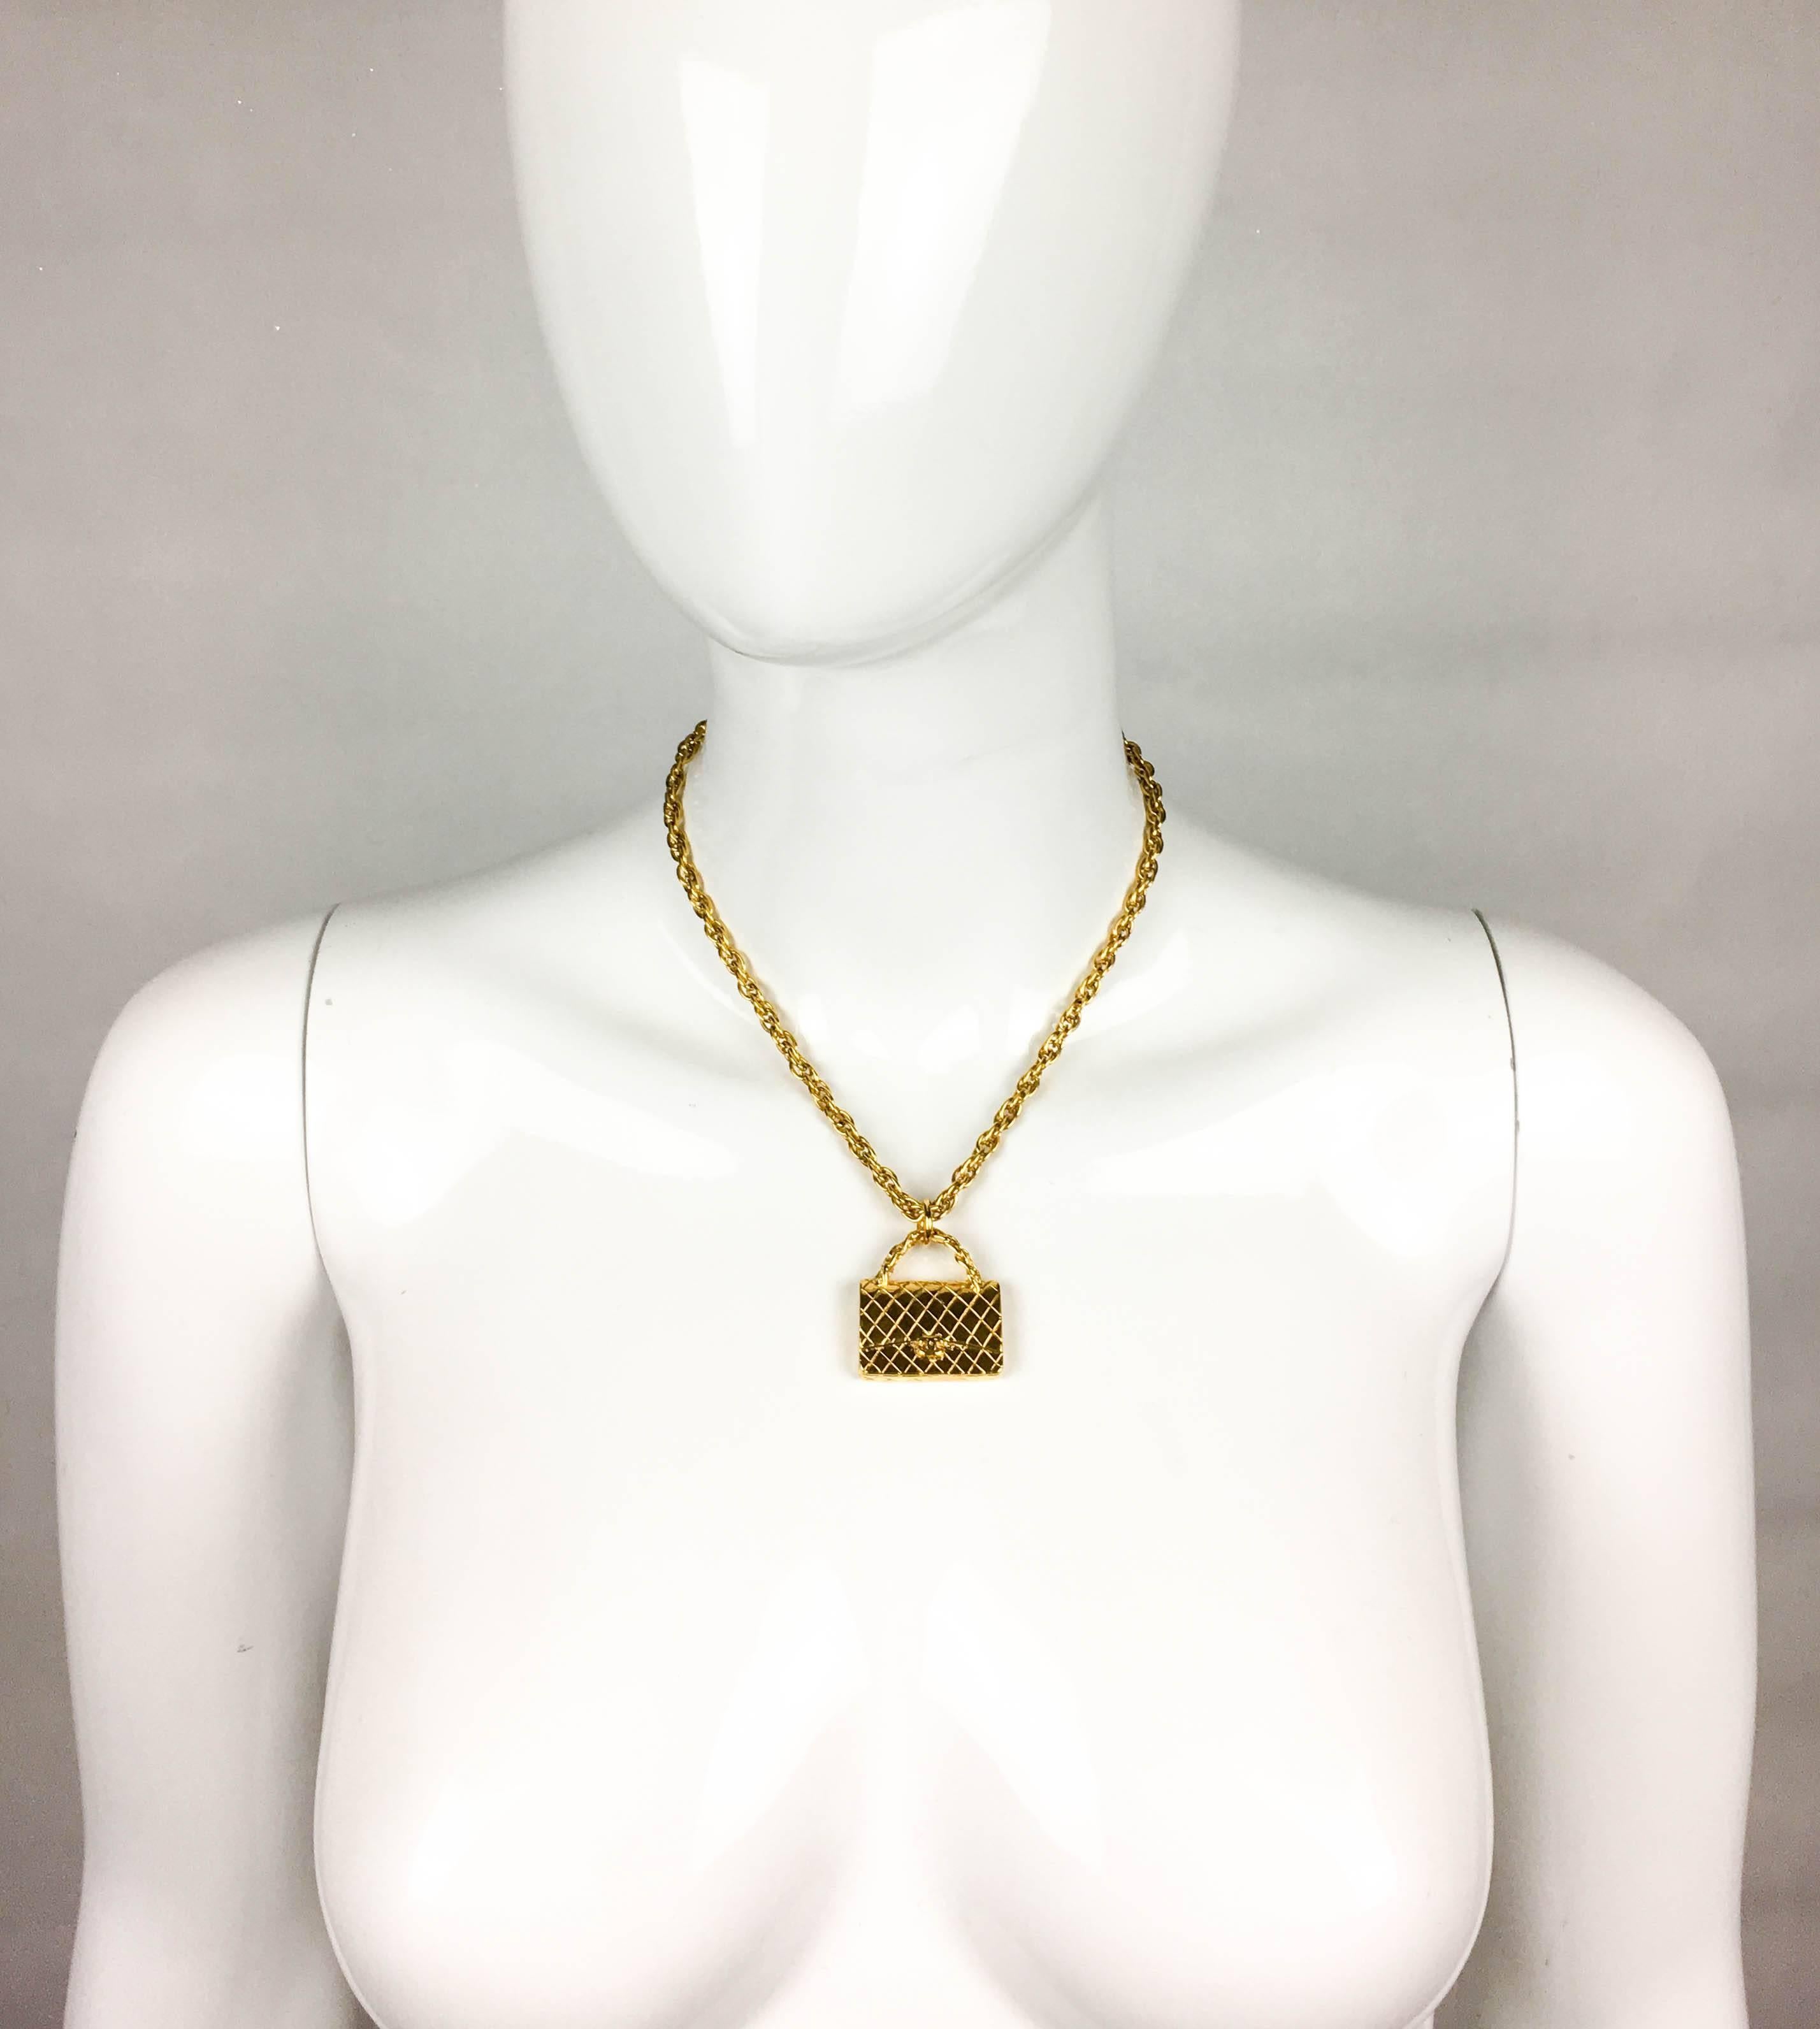 Vintage Chanel Gold-Plated Pendant Necklace. This stylish piece by Chanel features the iconic 2.55 handbag as a gold-plated pendant on a chain. Chanel 94 A signed on the back. The perfect way to add a dash of glamour to any look. 

Label / Designer: